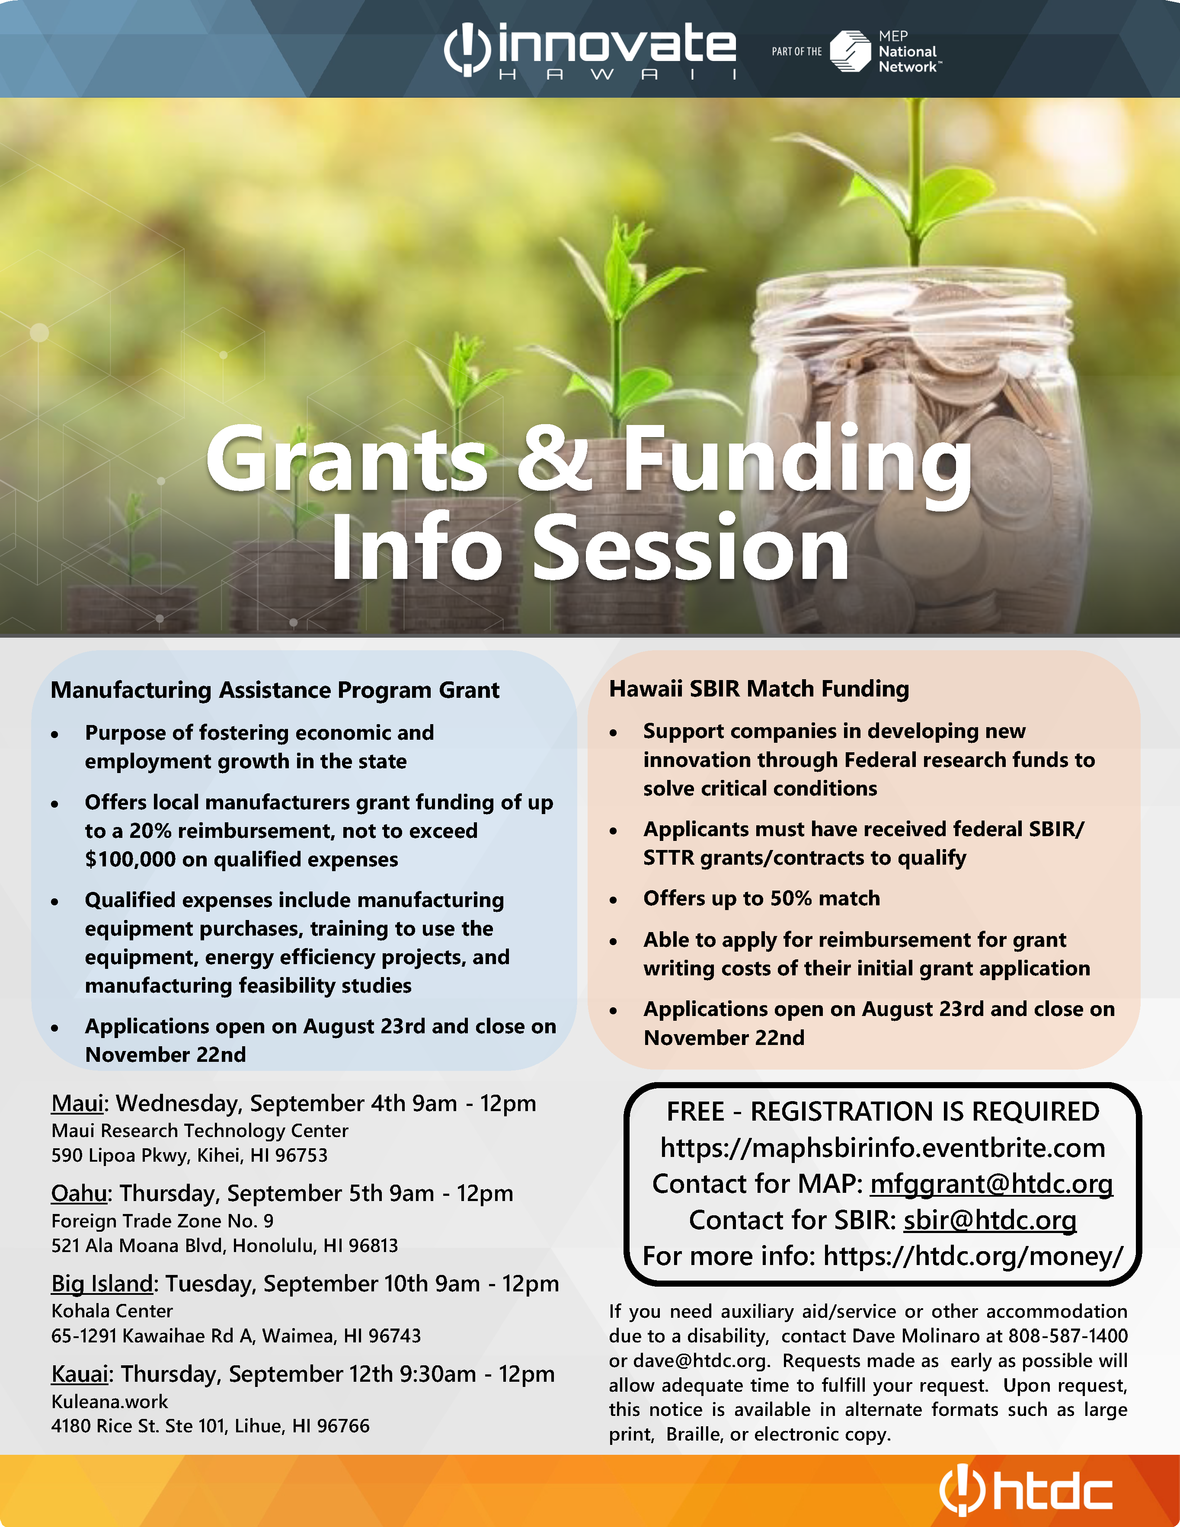 Htdc Grants Funding Info Session Maui Htdc